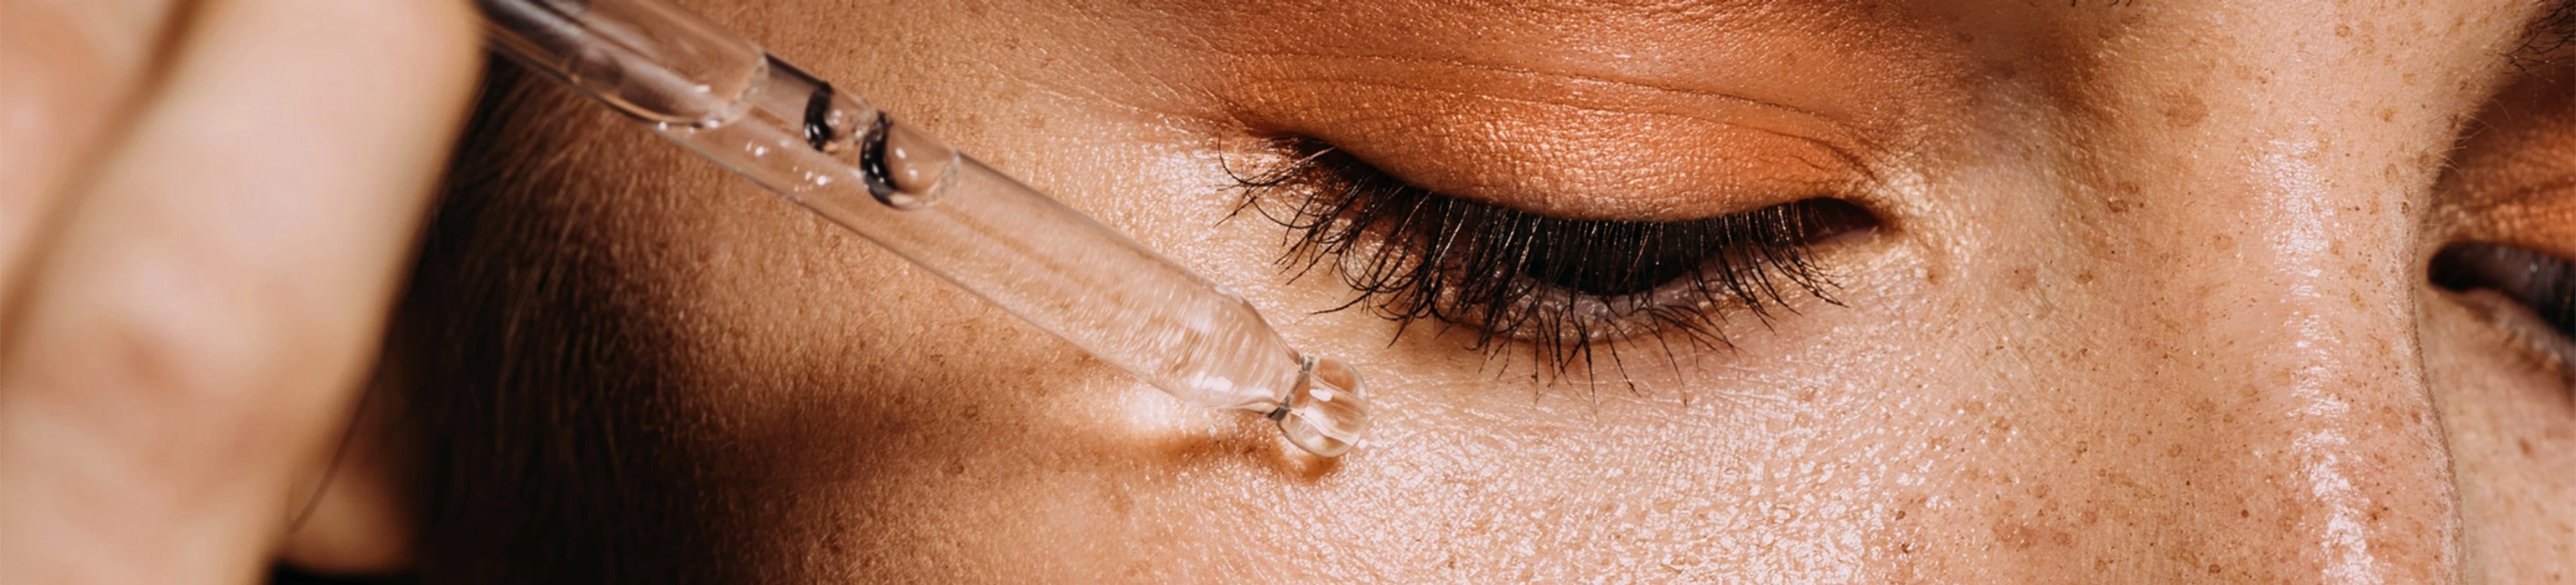 woman holding skin care dropper to under eye and applying serum